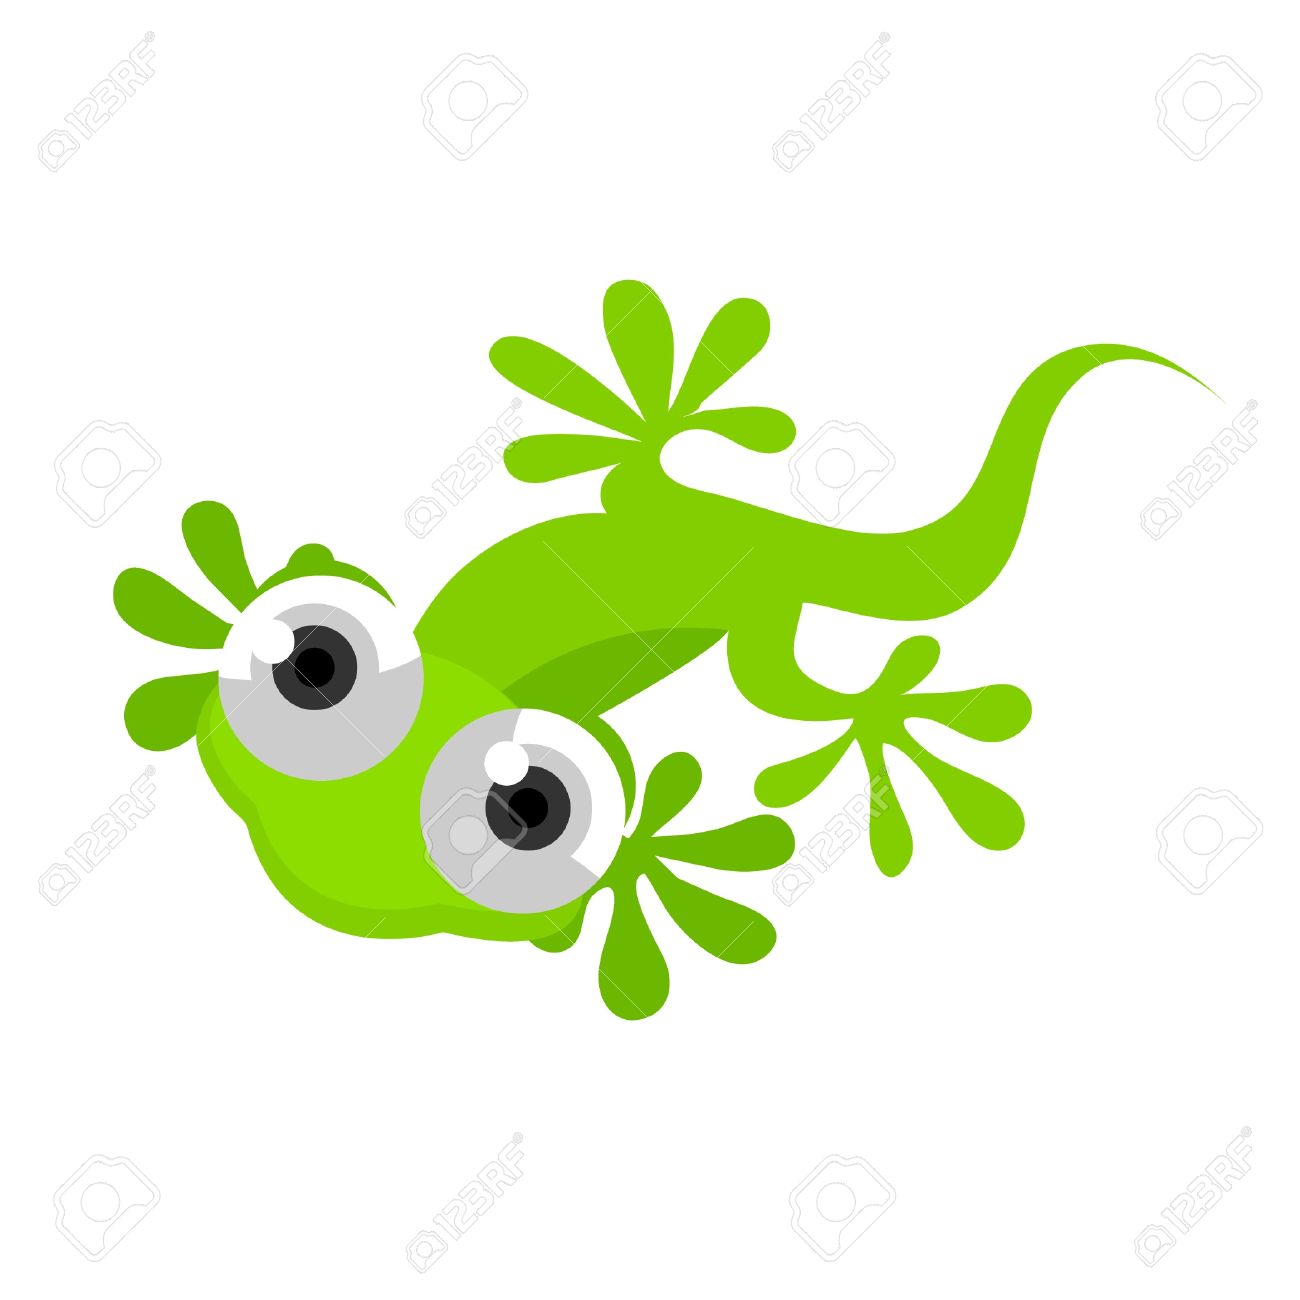 Gecko clipart #5, Download drawings